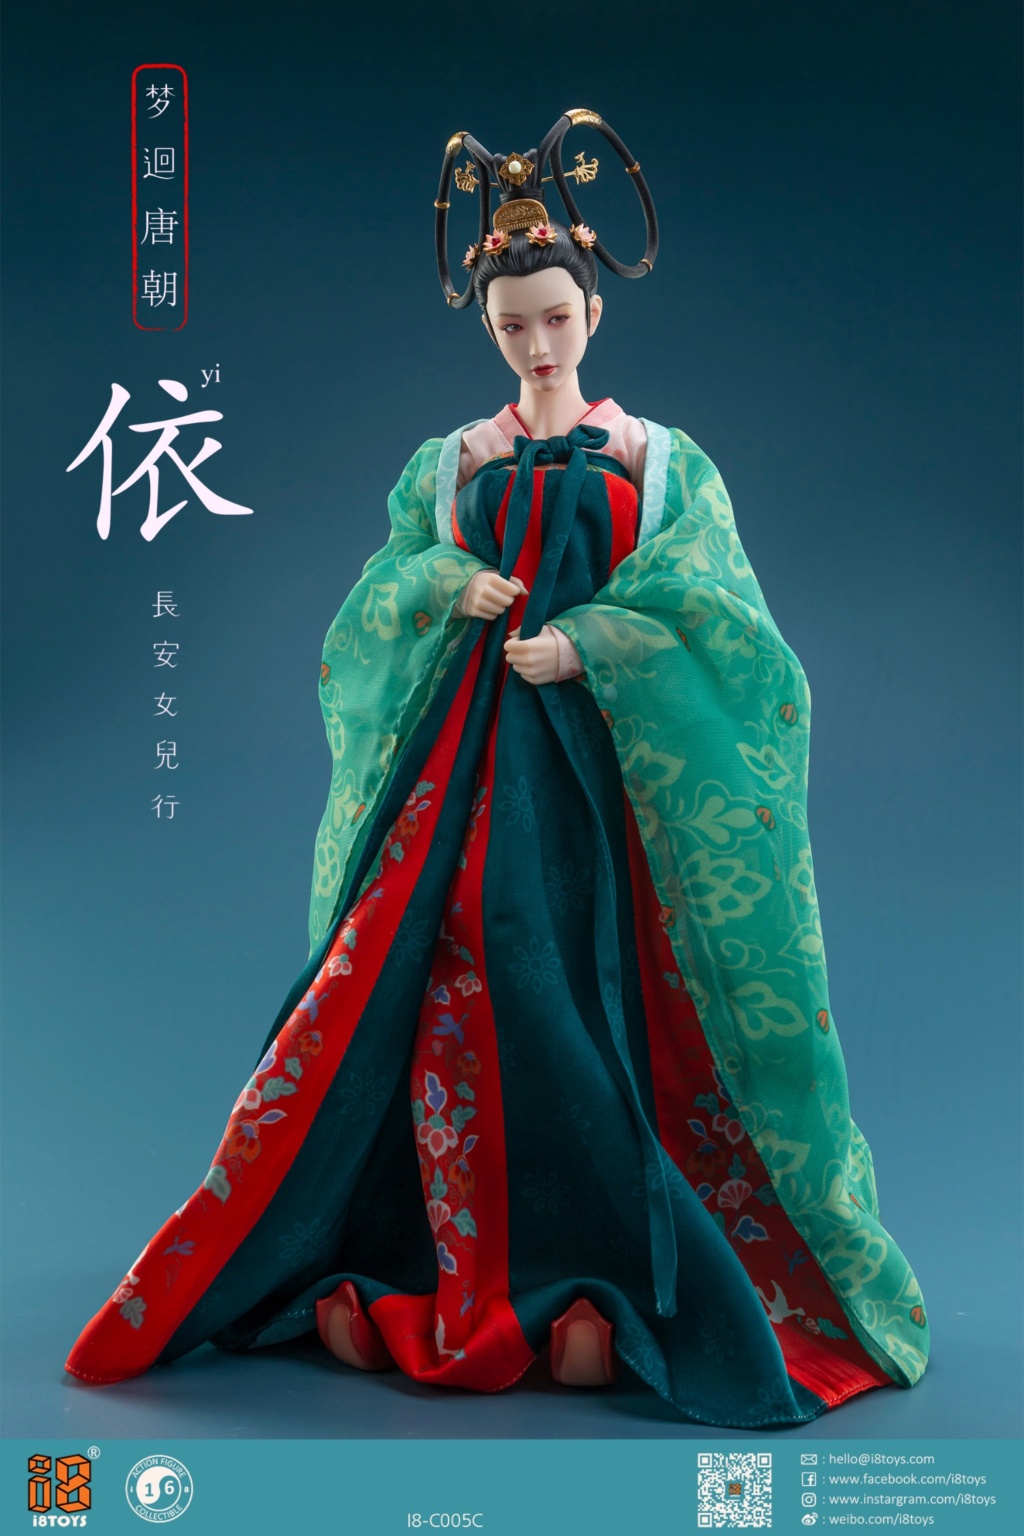 headsculpt - NEW PRODUCT: I8Toys: I8-C005 1/6 Scale Han Chinese Clothing sets 11450610